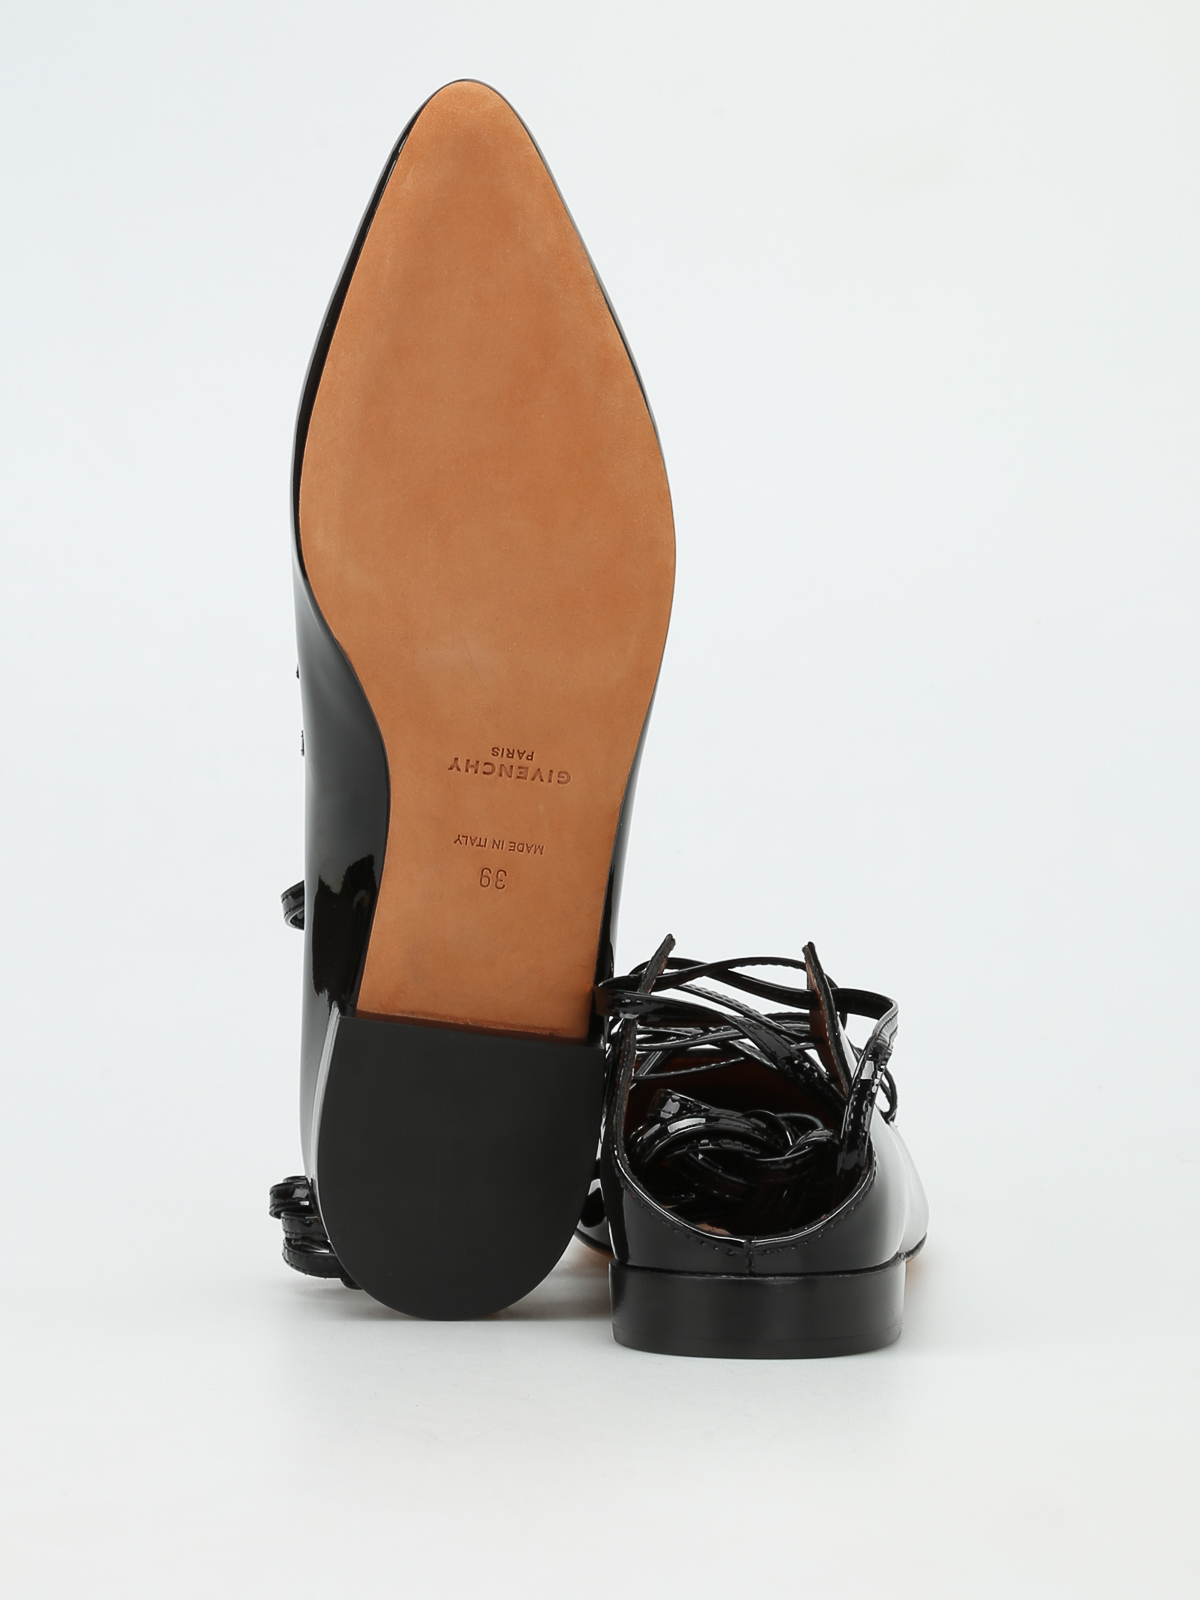 patent leather ballerinas - flat shoes 